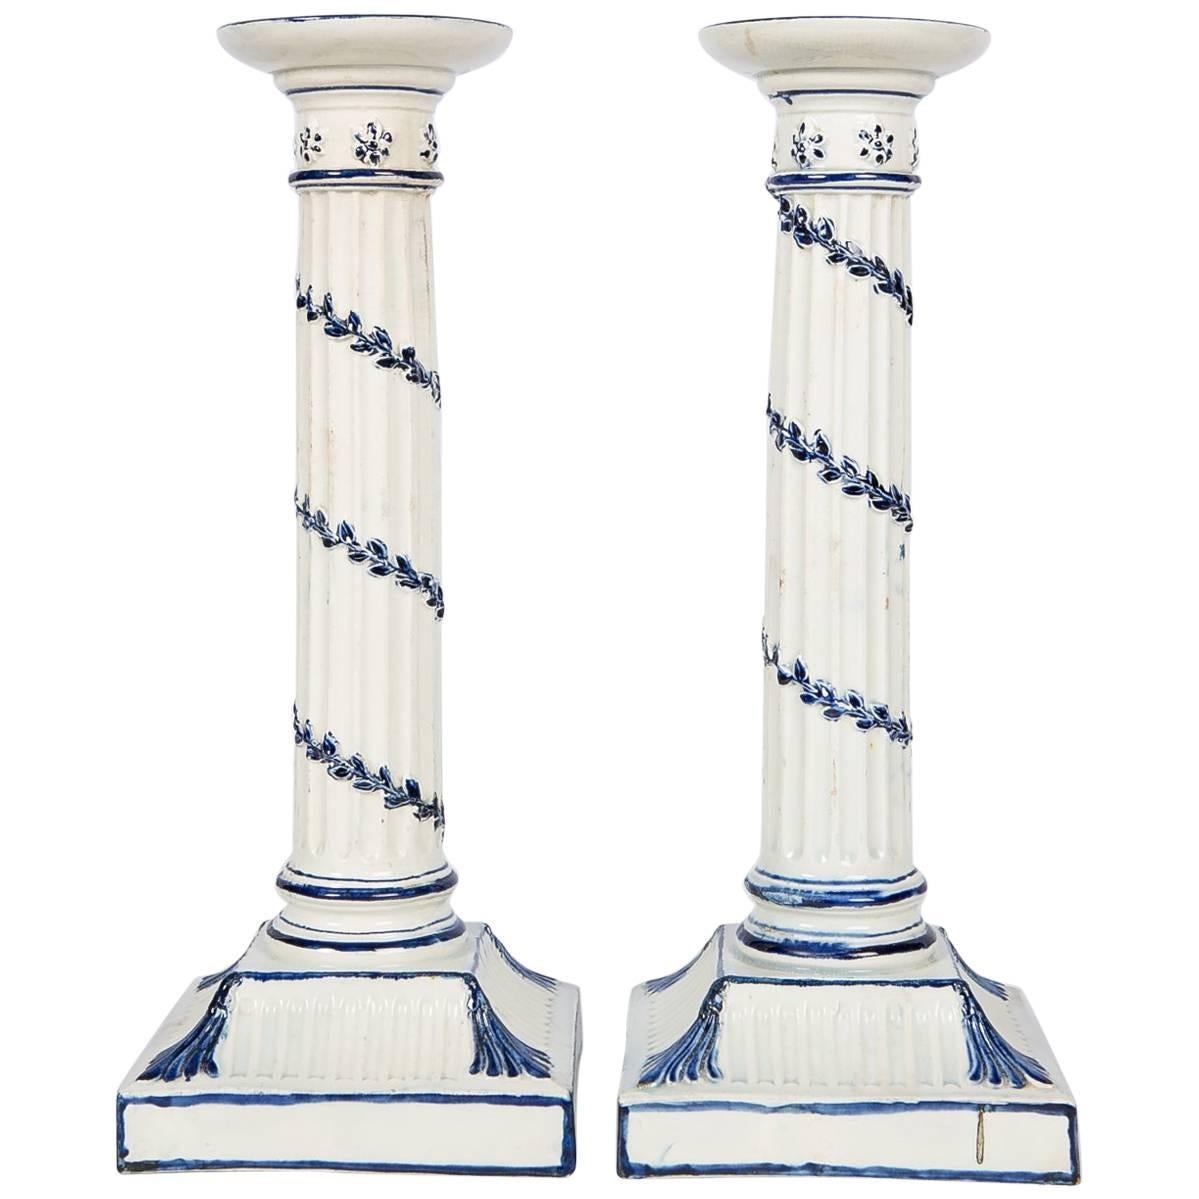 Wedgwood Blue and White Candlesticks with Neoclassical Design